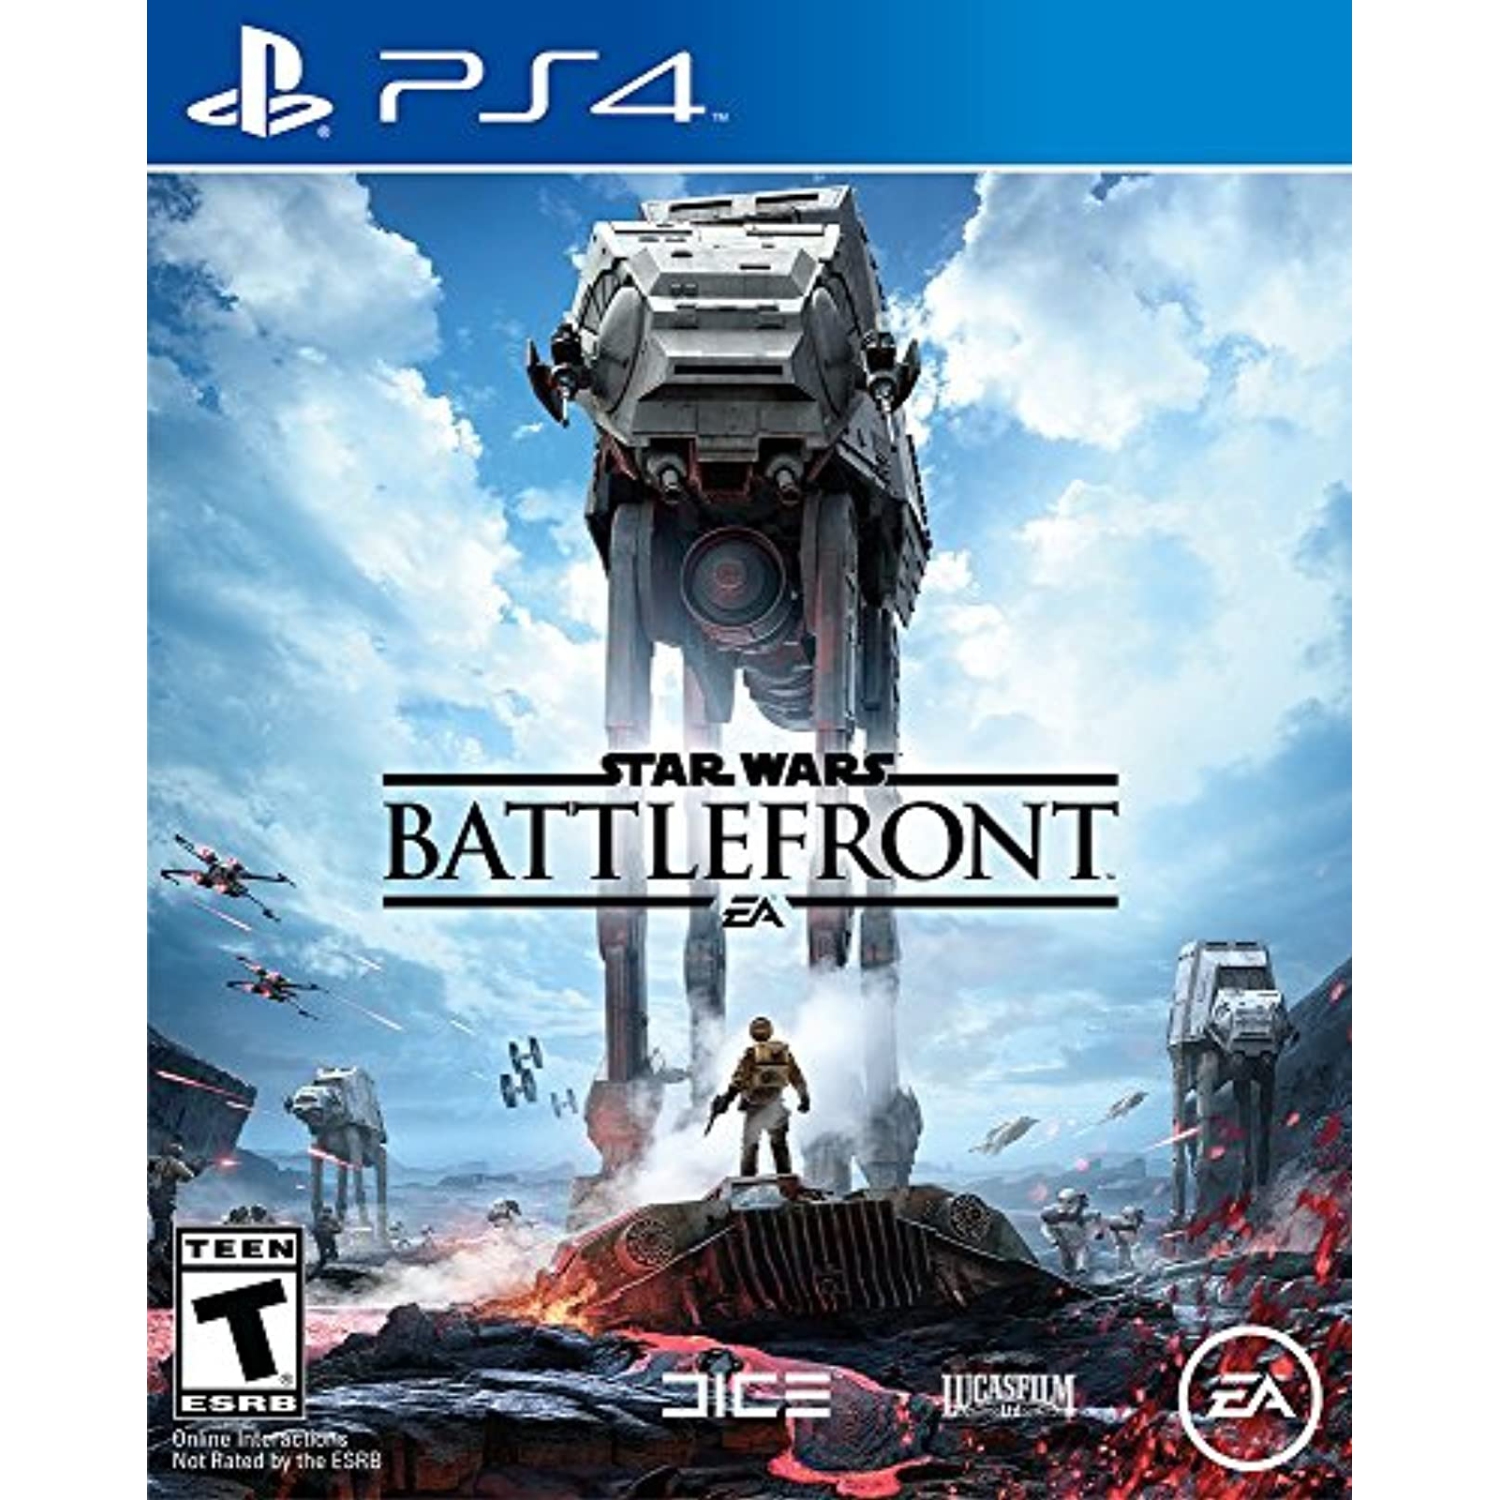 Previously Played - Star Wars: Battlefront Standard Edition PlayStation 4